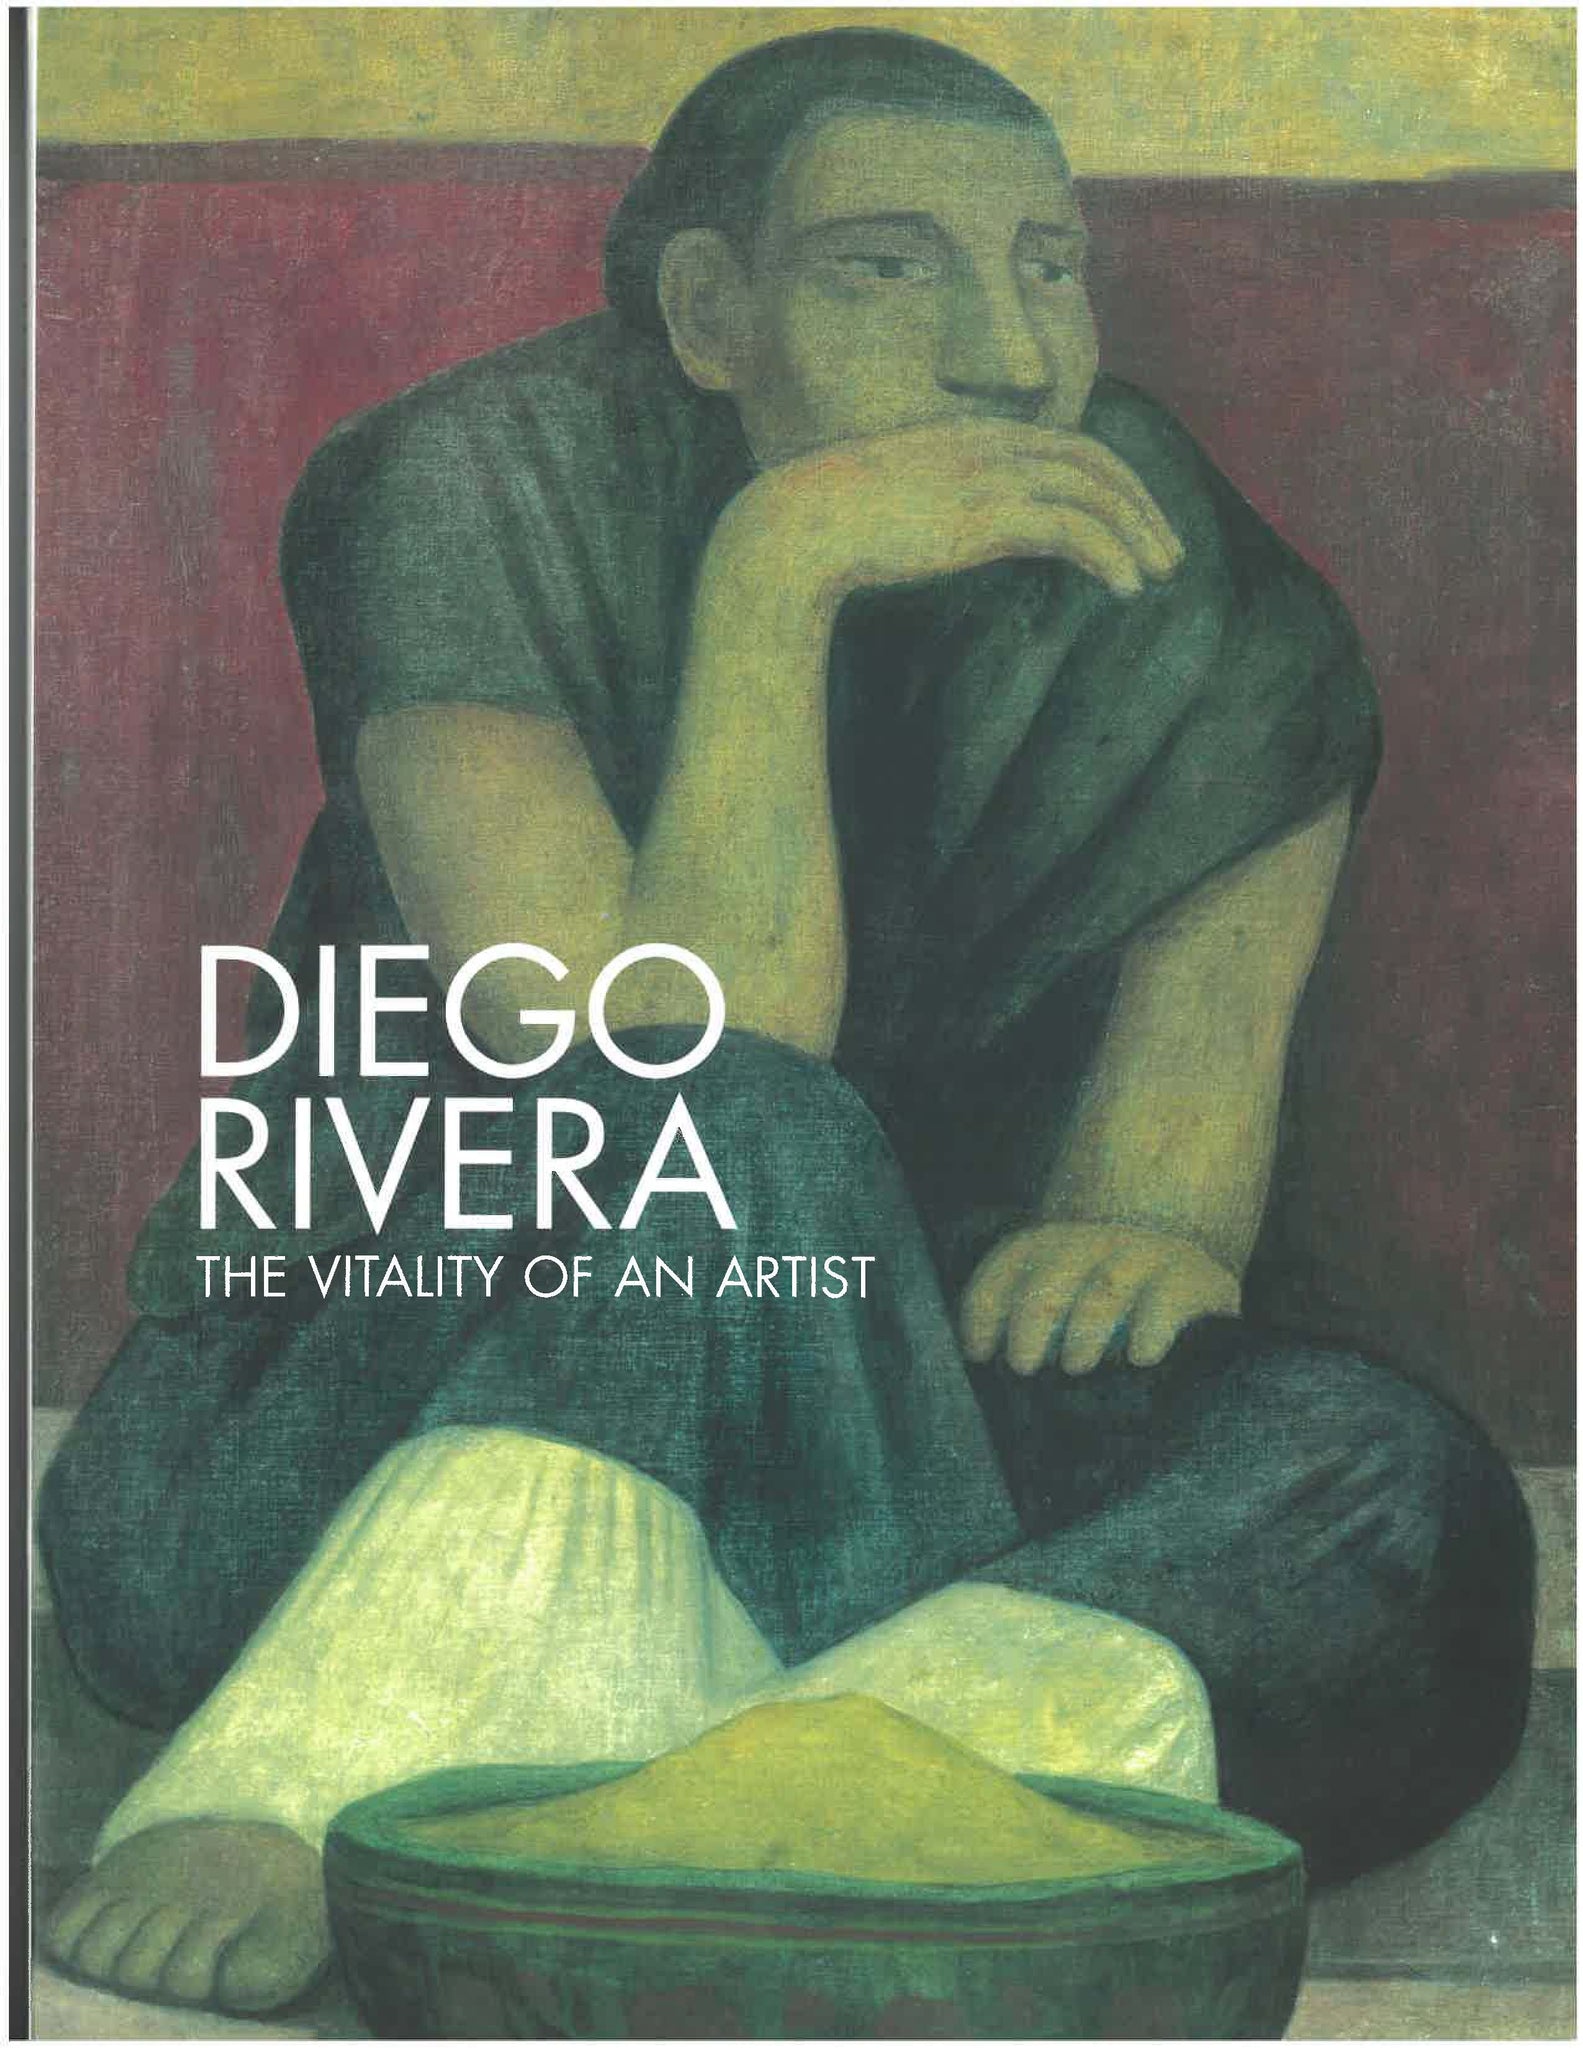 Diego Rivera: The Vitality of an Artist